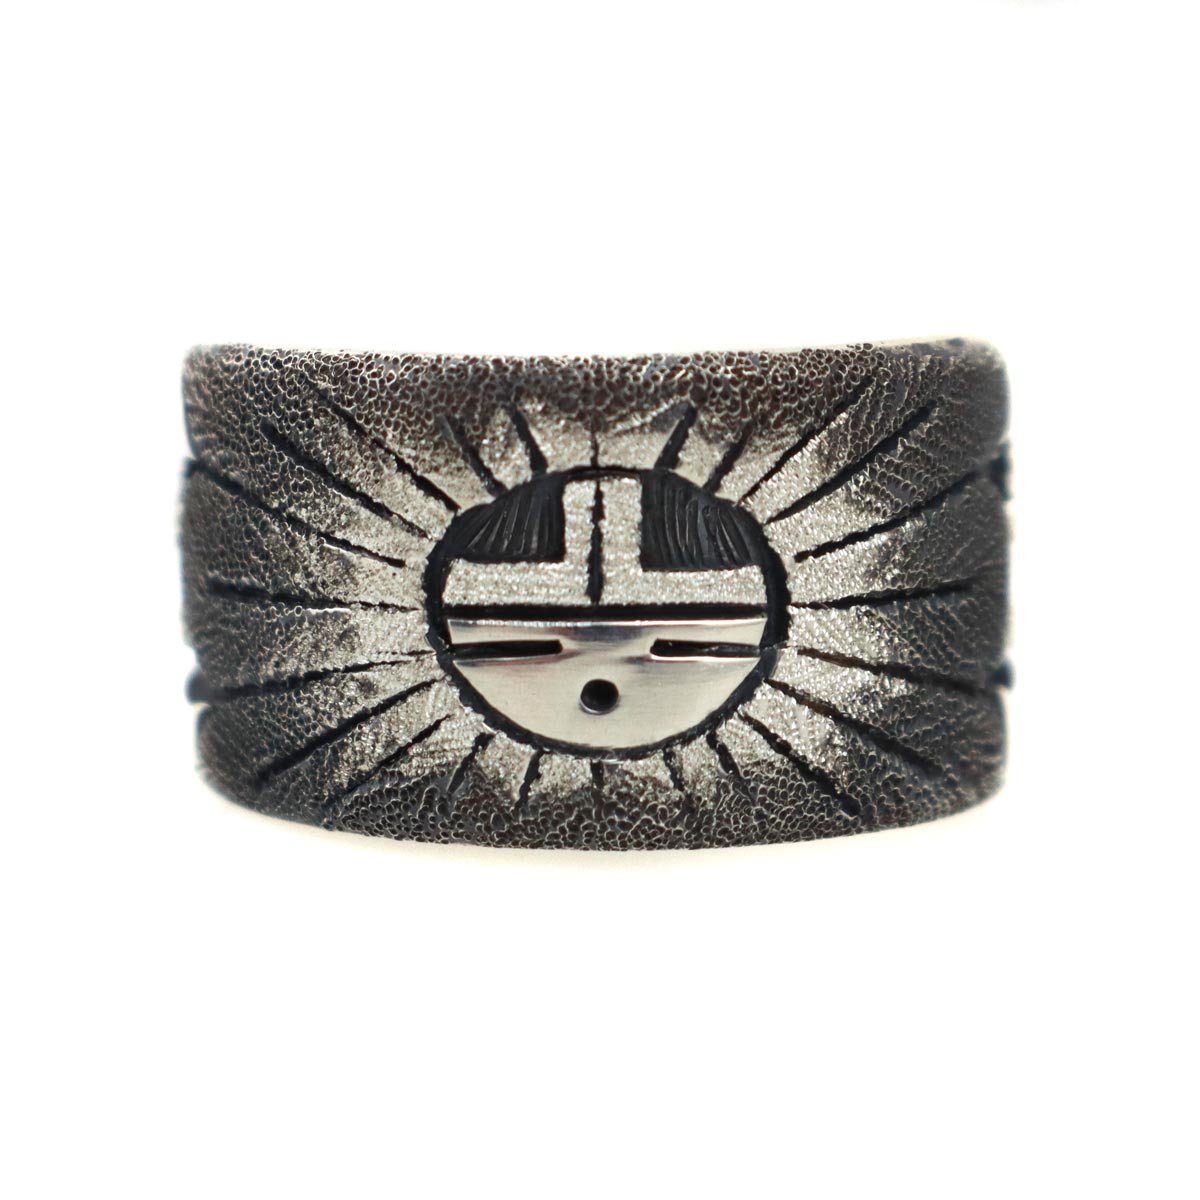 Ronald Wadsworth - Hopi Contemporary Sterling Silver Overlay Ring with Sunface Kachina Design, size 9 (J14773)